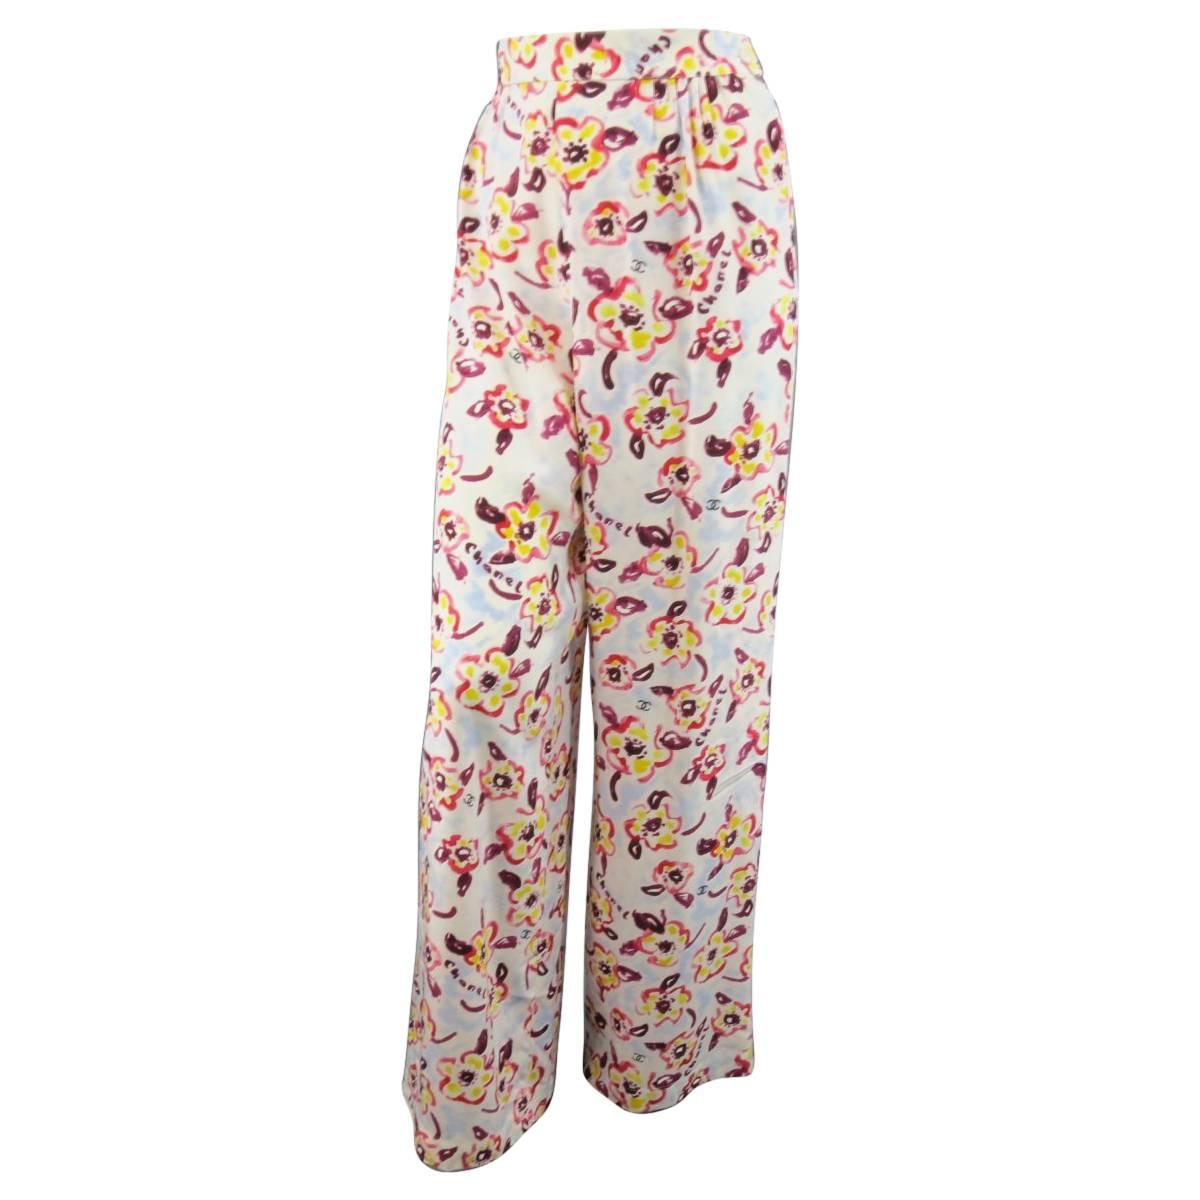 1996 CHANEL Size 8 Light Blue Pink & Yellow Watercolor Floral Wide Leg Pants